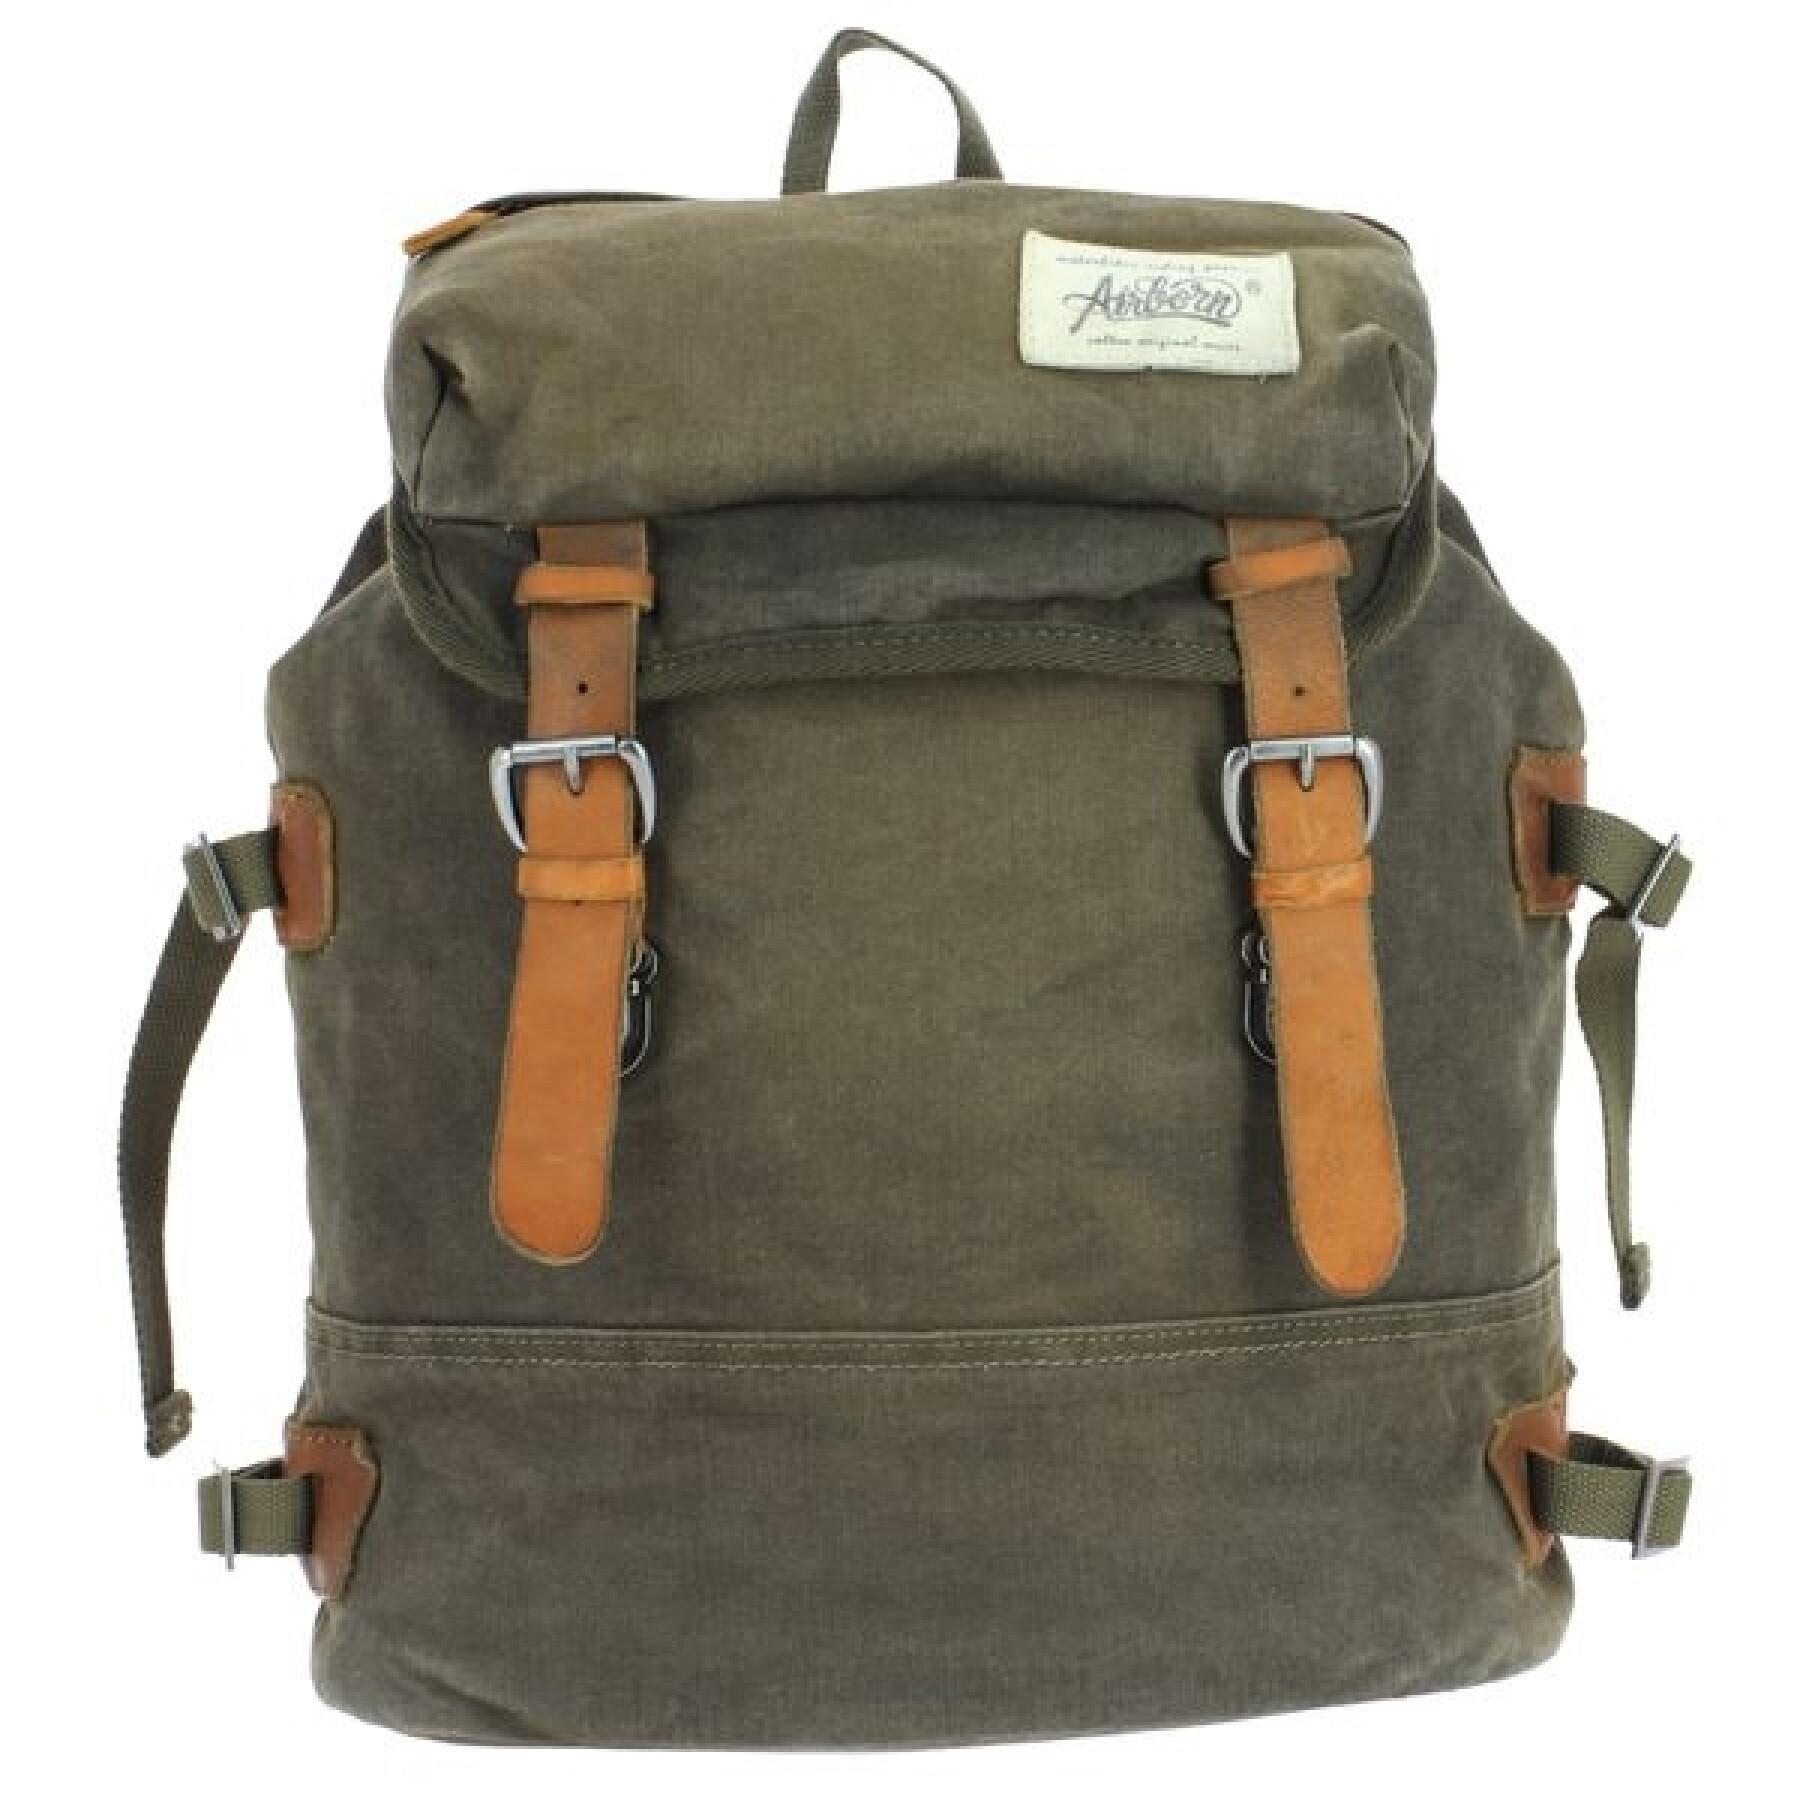 Backpack Airborn ABSD coton/cuir